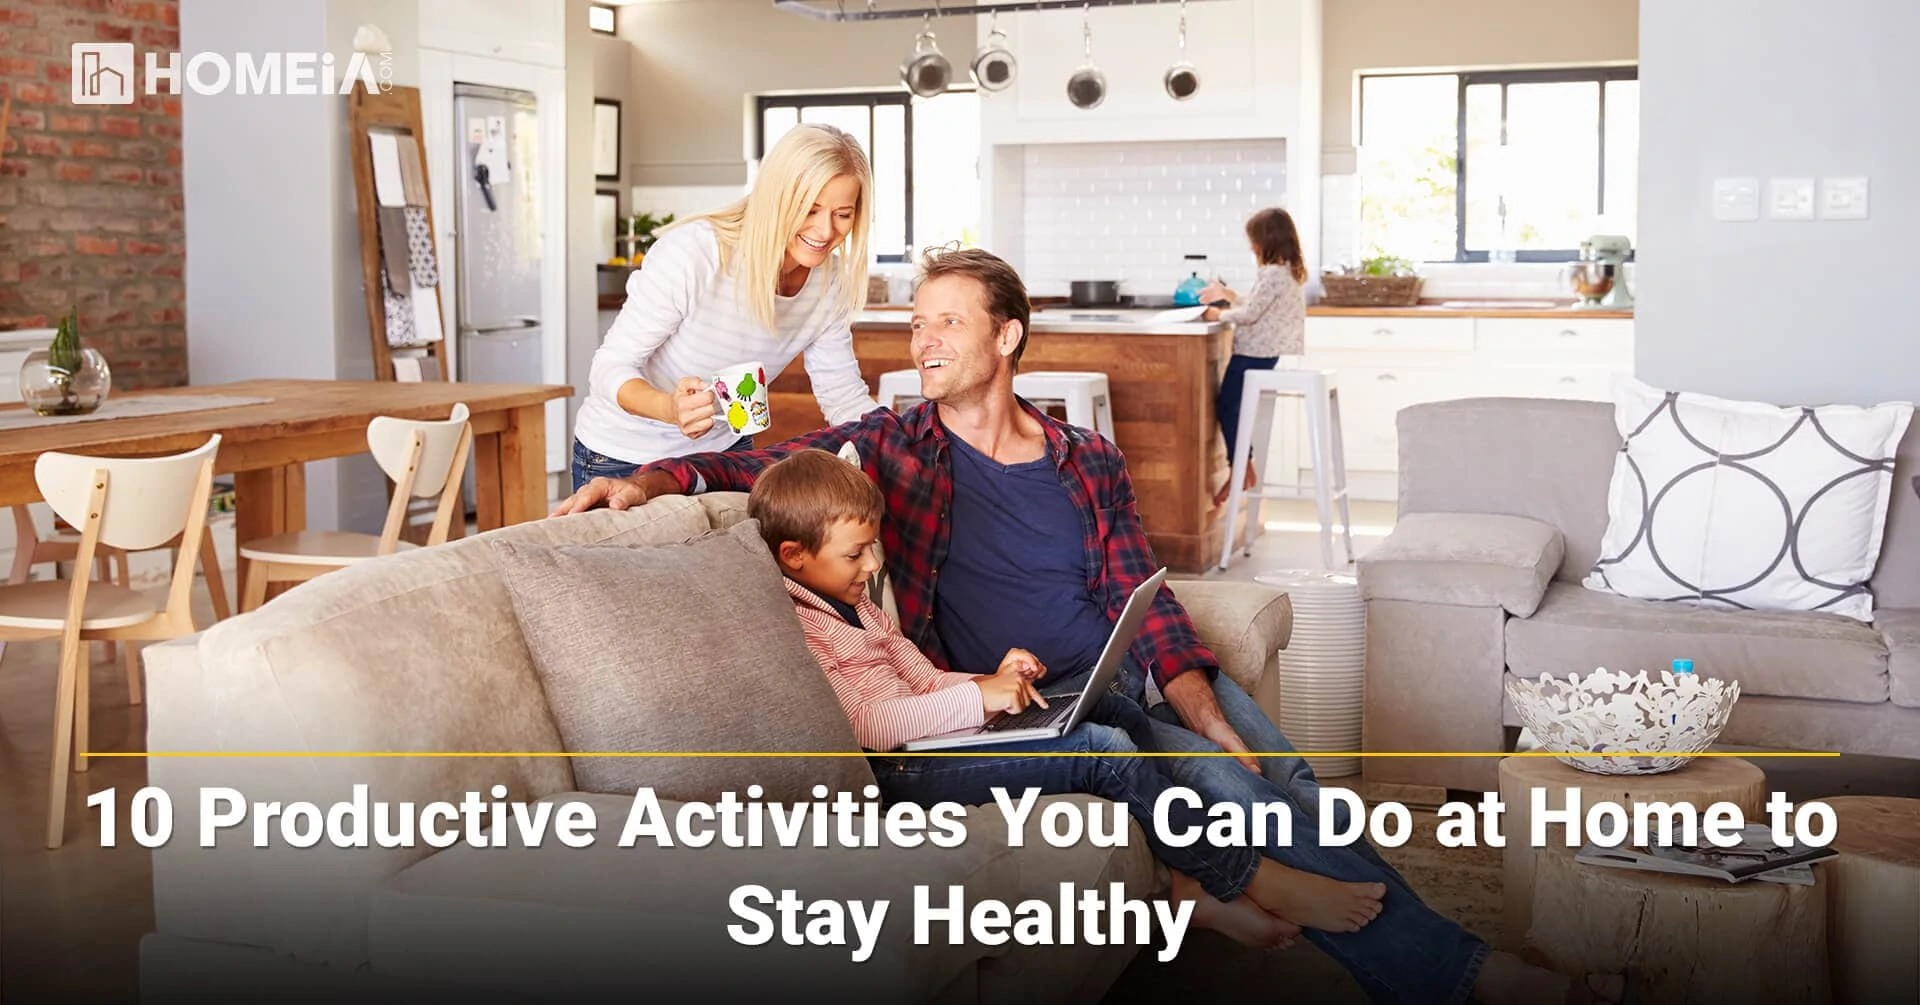 10 Productive Activities You Can Do at Home to Stay Healthy